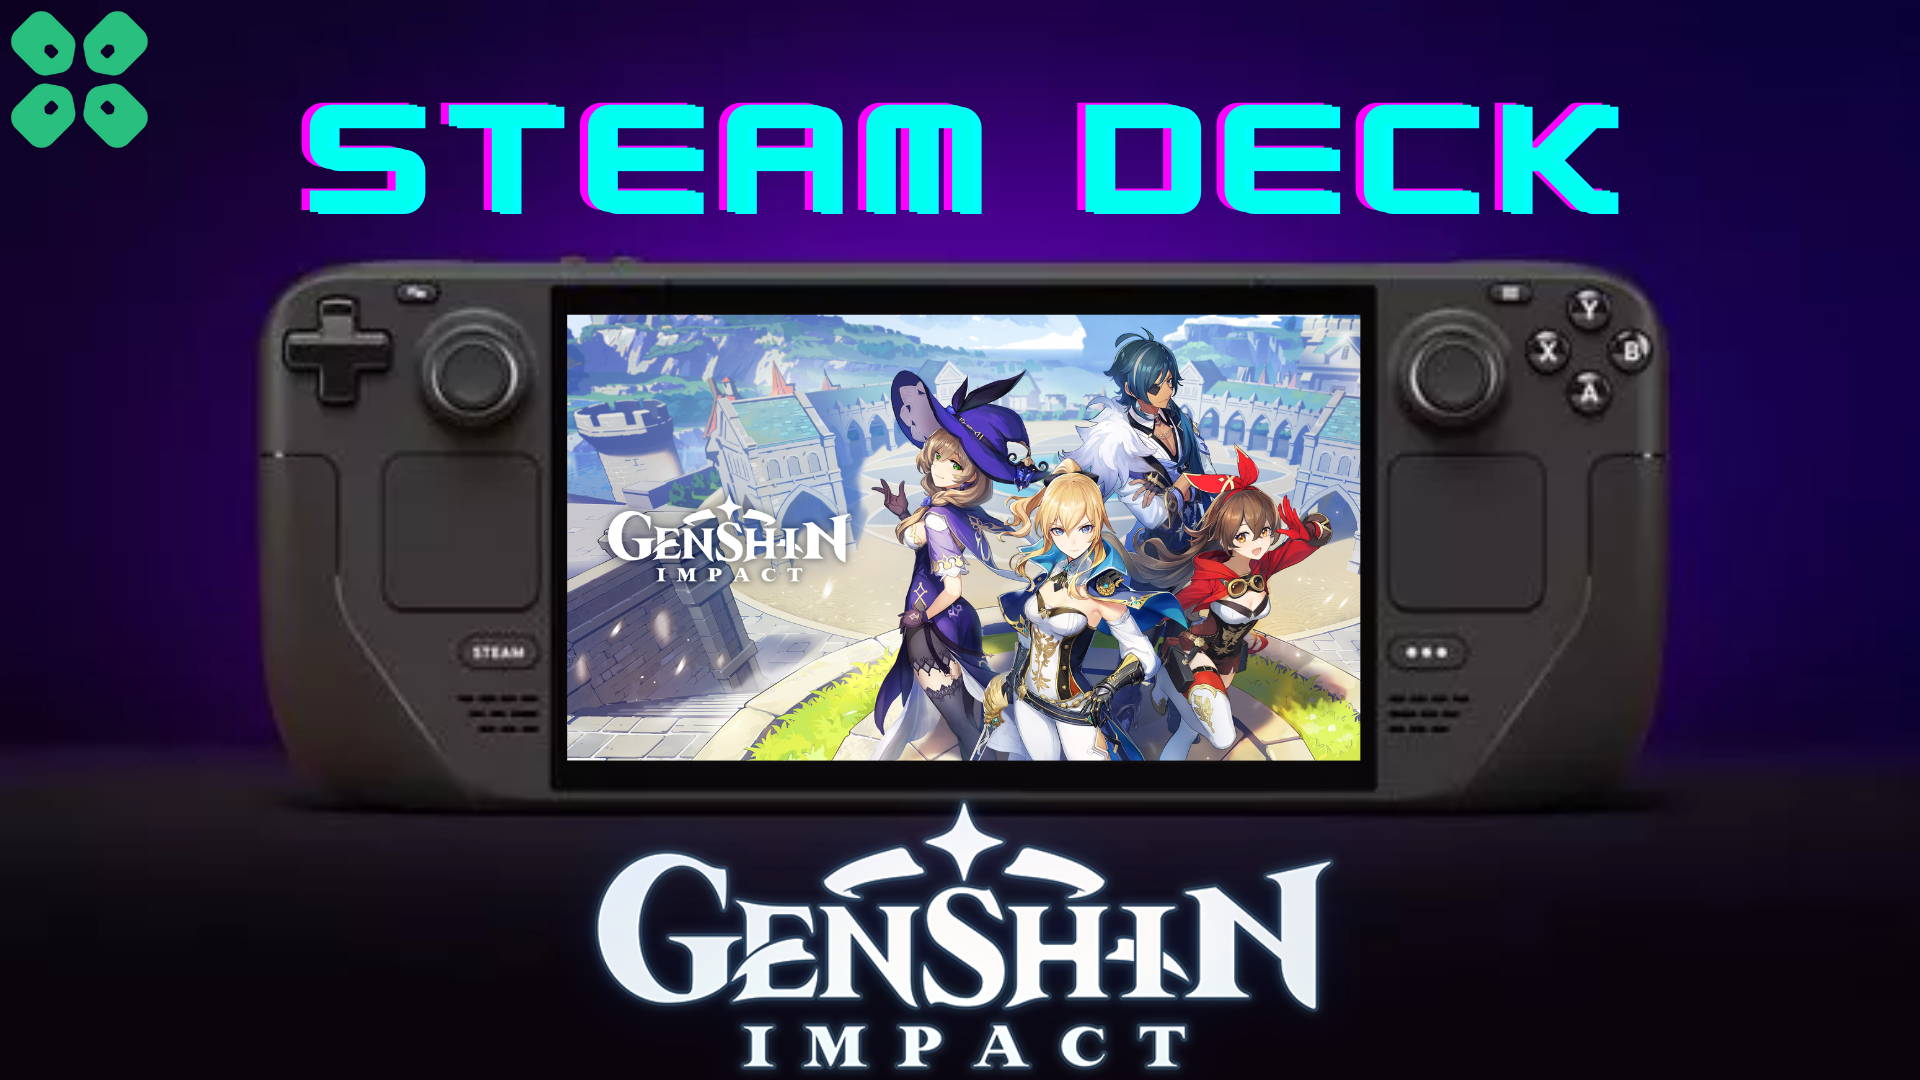 How to Play Genshin Impact on Steam Deck with Steam OS